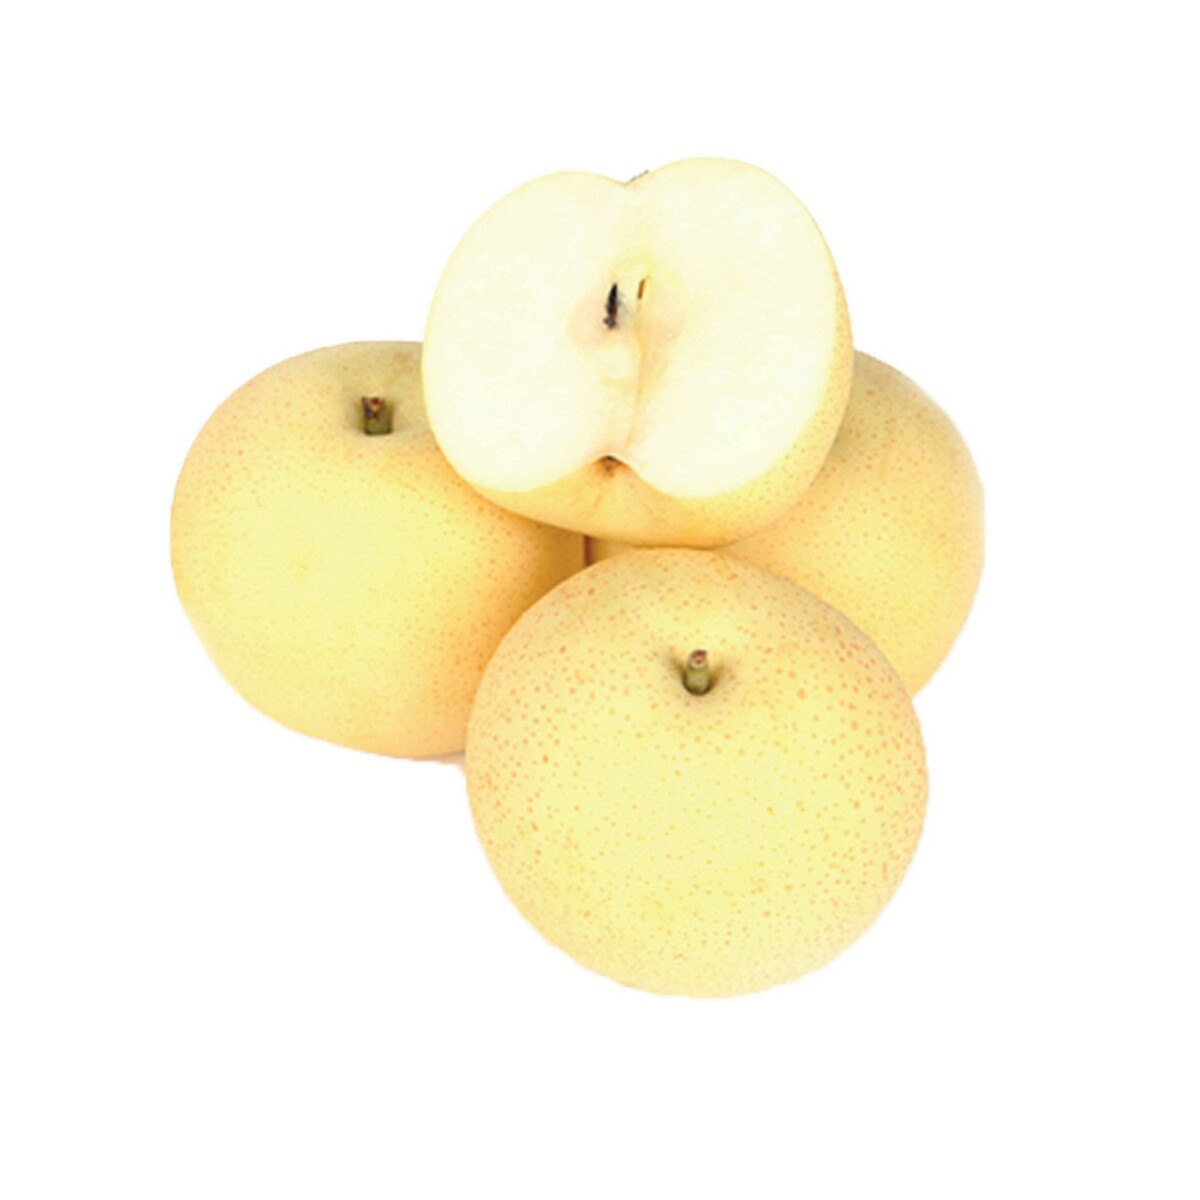 Pears Golden China 1Kg Approx Weight